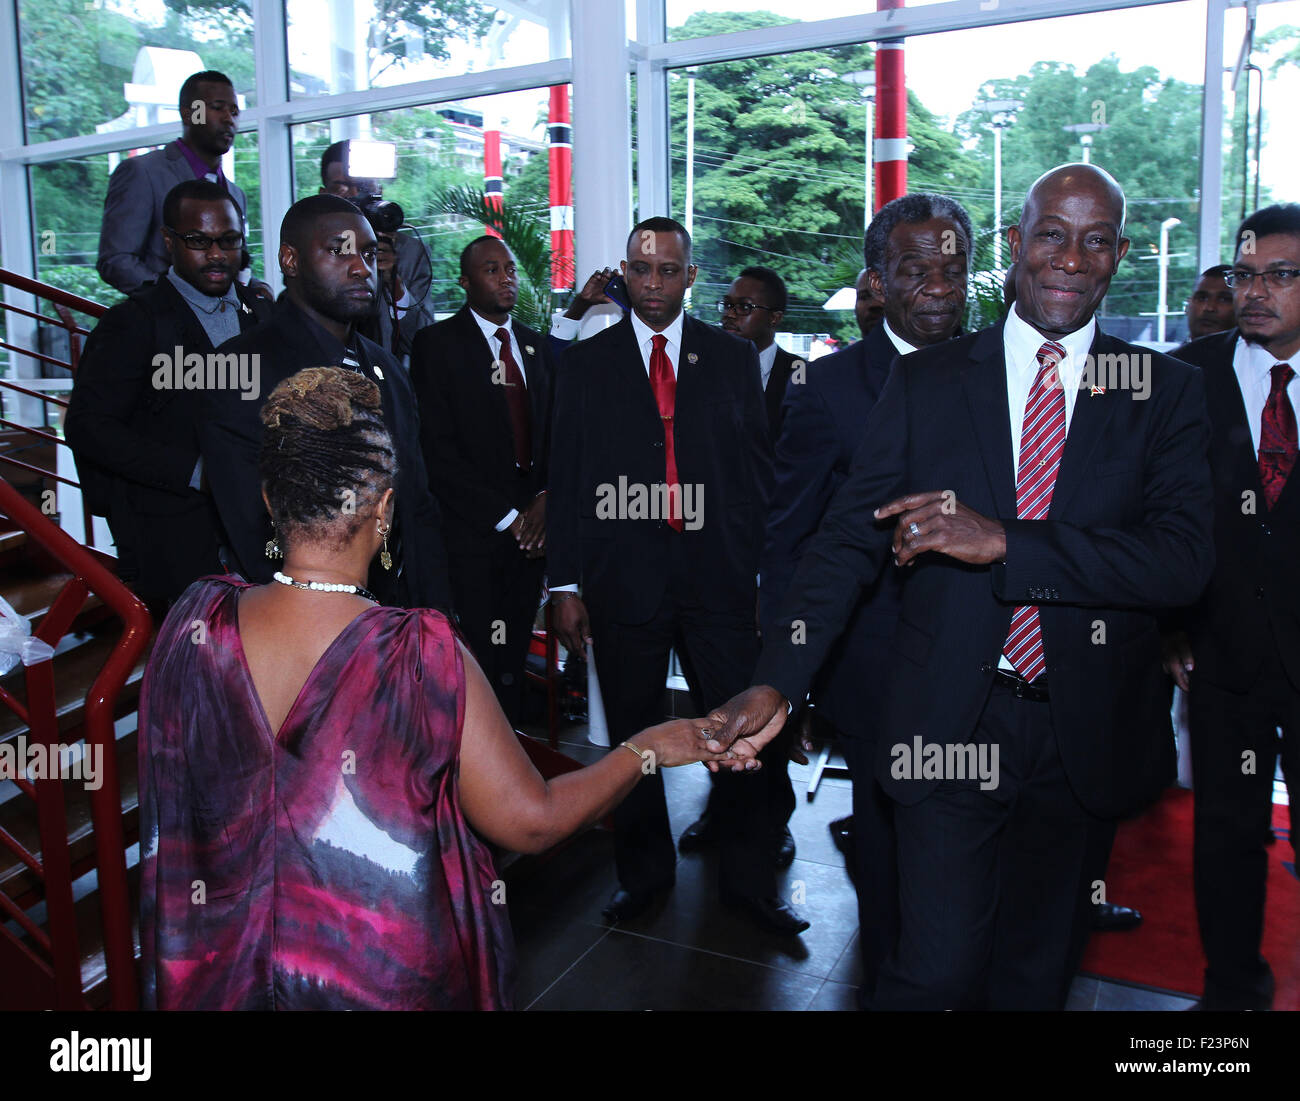 Port of Spain, Trinidad & Tobago. 9th September, 2015. Keith Christopher Rowley (R), Prime Minister of Trinidad & Tobago, greets a lady at his swearing-in ceremony at Queen's Hall in Port of Spain, Trinidad on September 9, 2015.  (Photo by Sean Drakes/Alamy Live News) Credit:  SEAN DRAKES/Alamy Live News Stock Photo